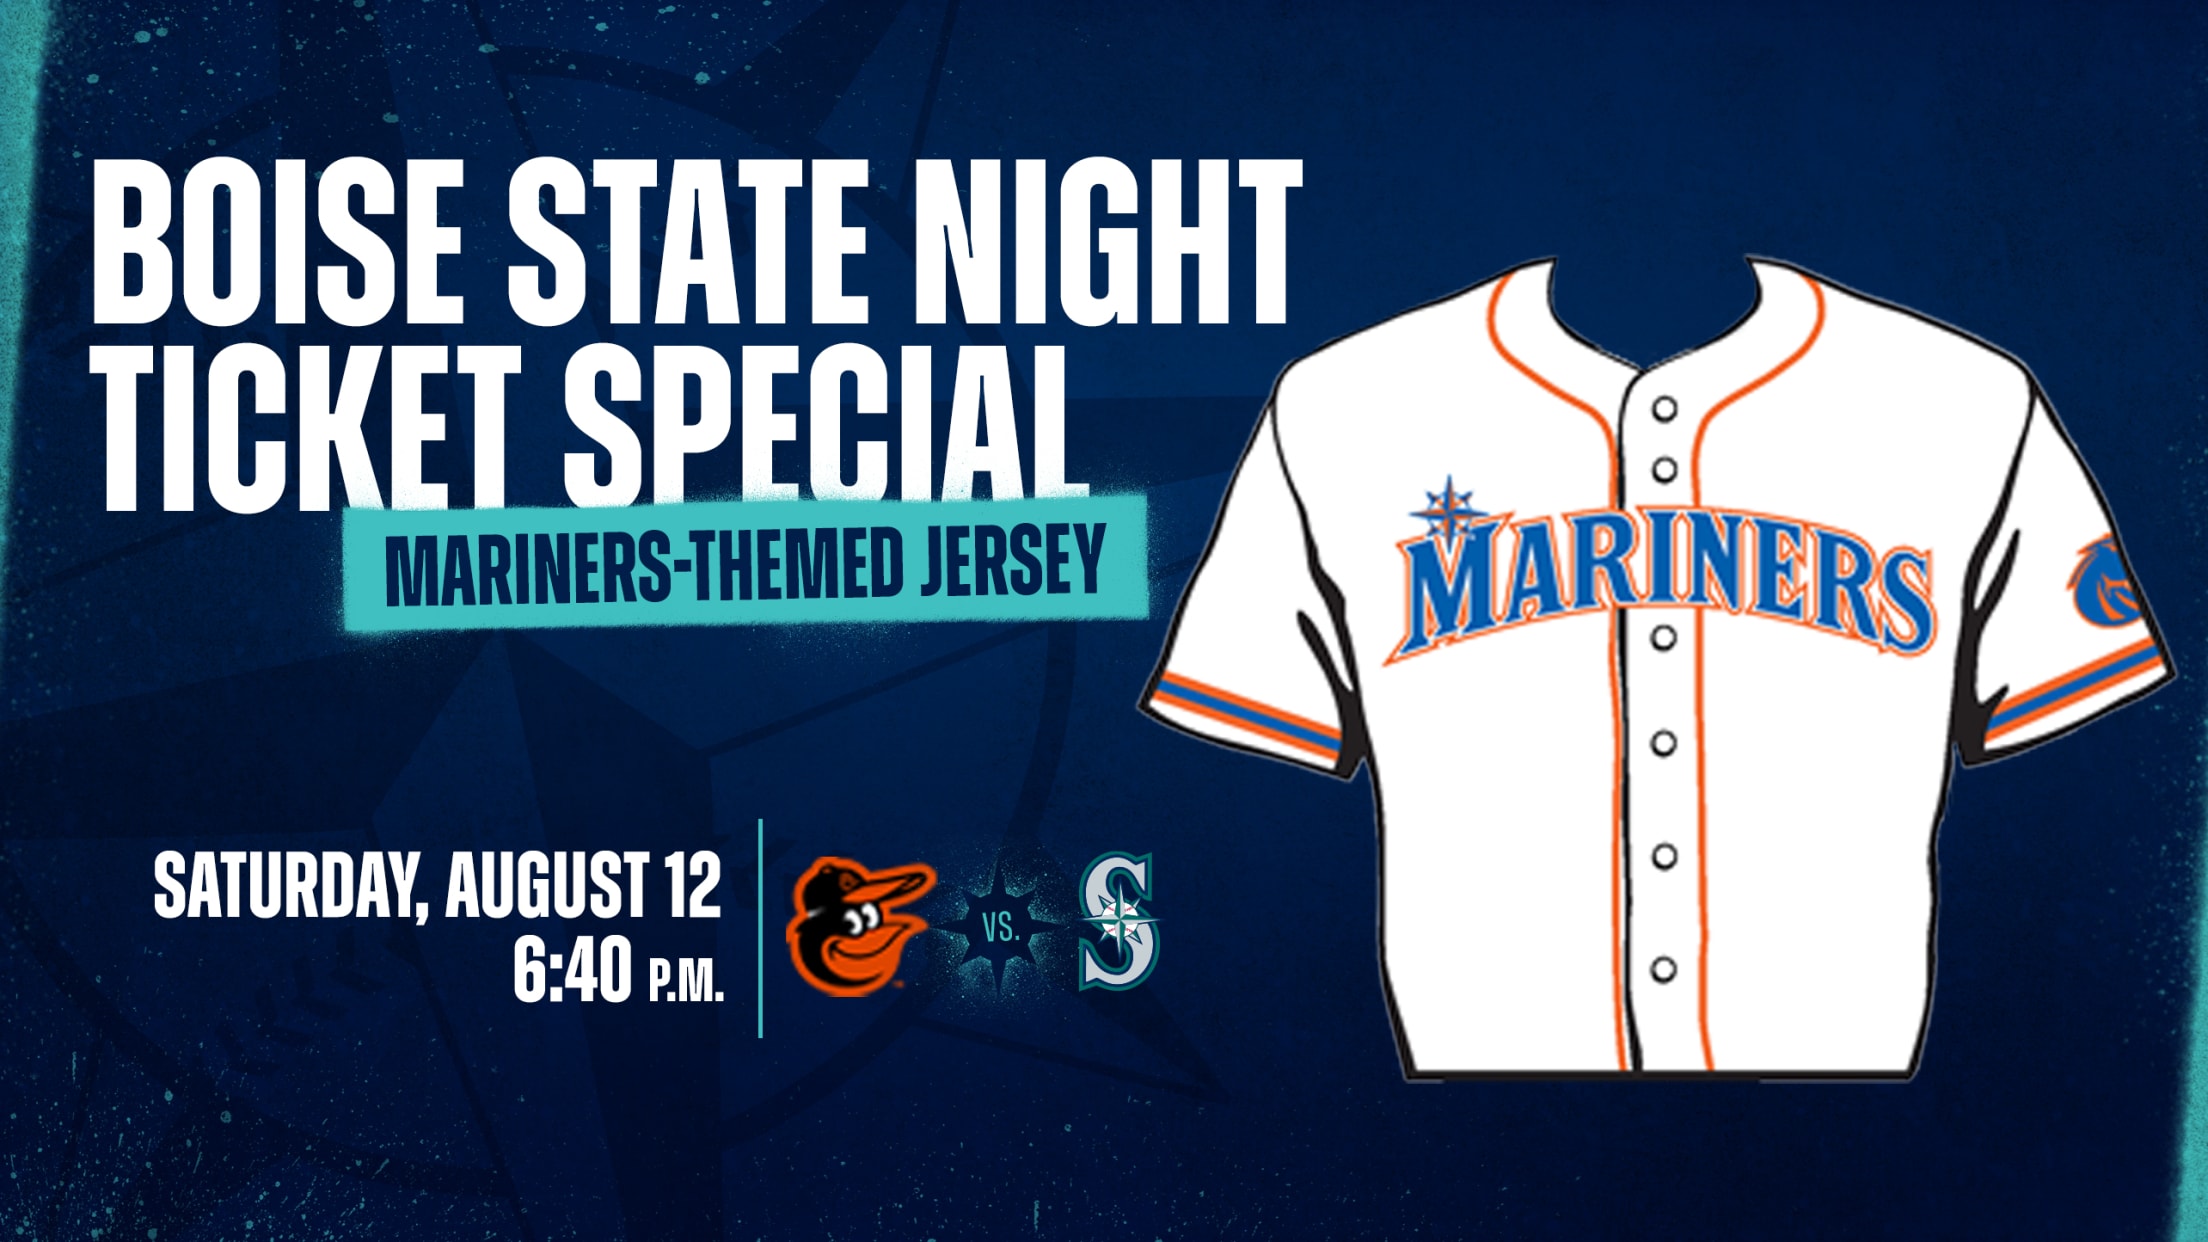 seattle mariners red jersey